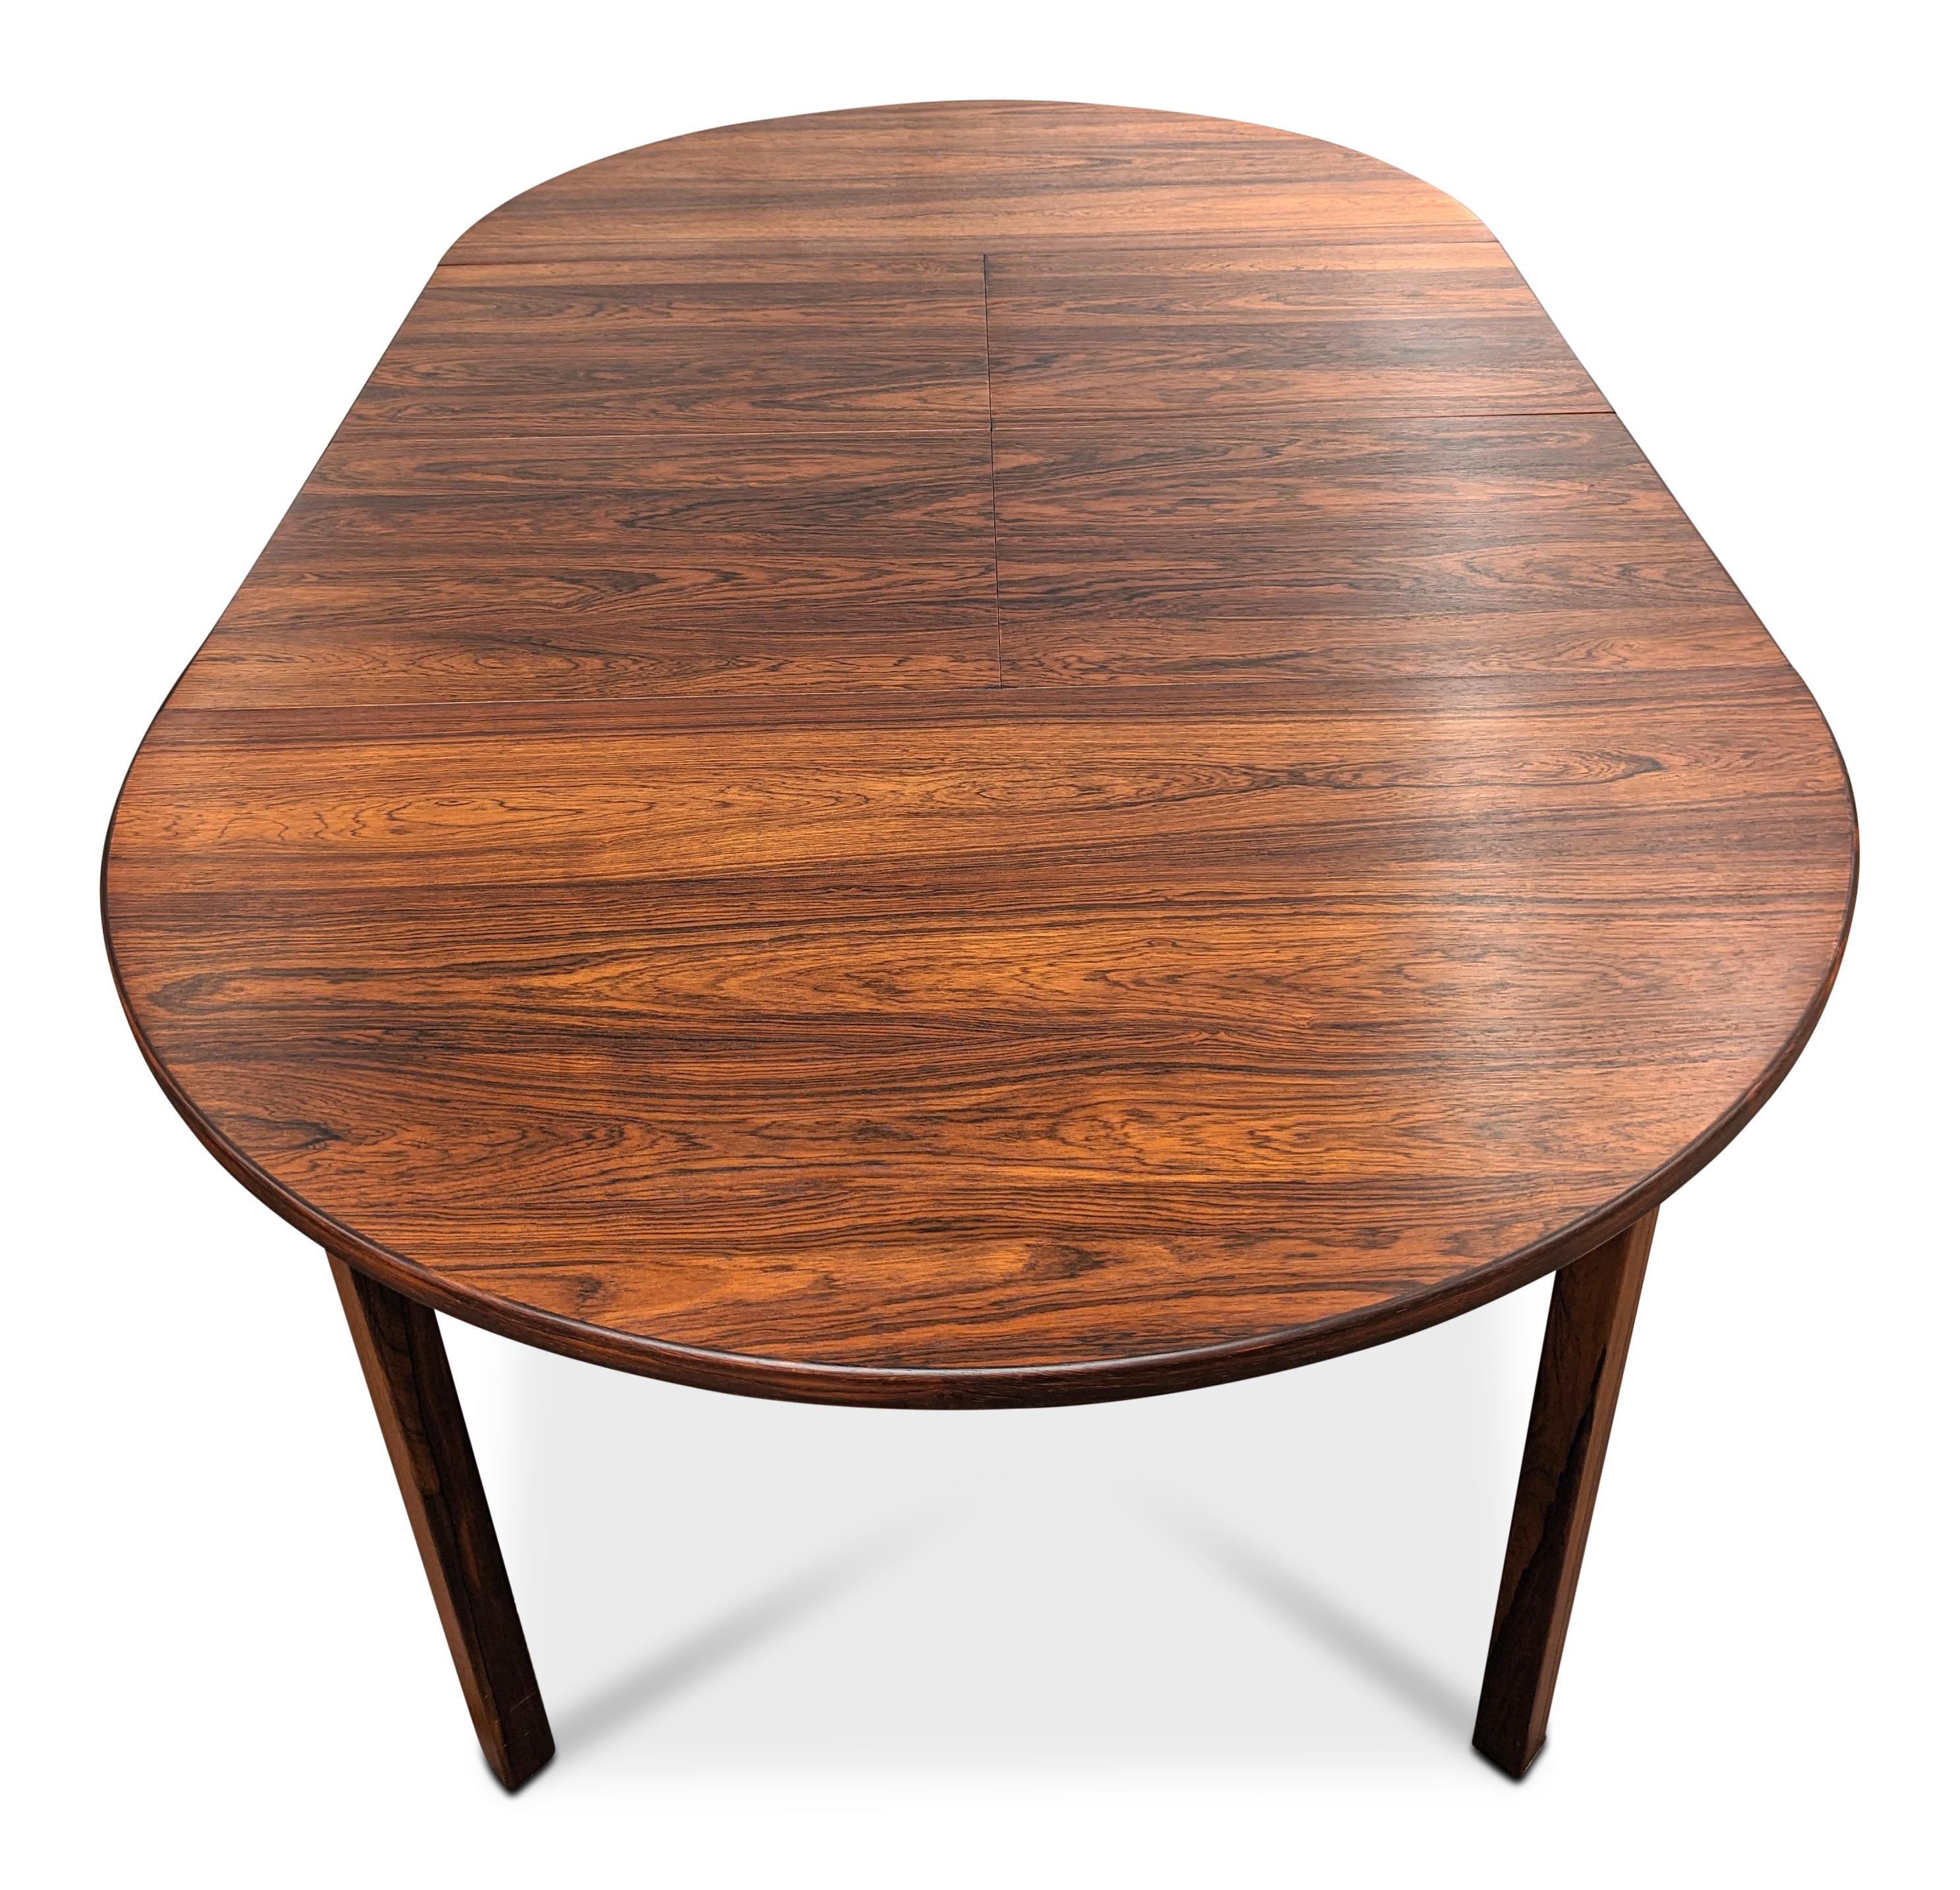 Round Rosewood Table w 2 Butterfly Leaves - 022435 Vintage Danish Modern 7